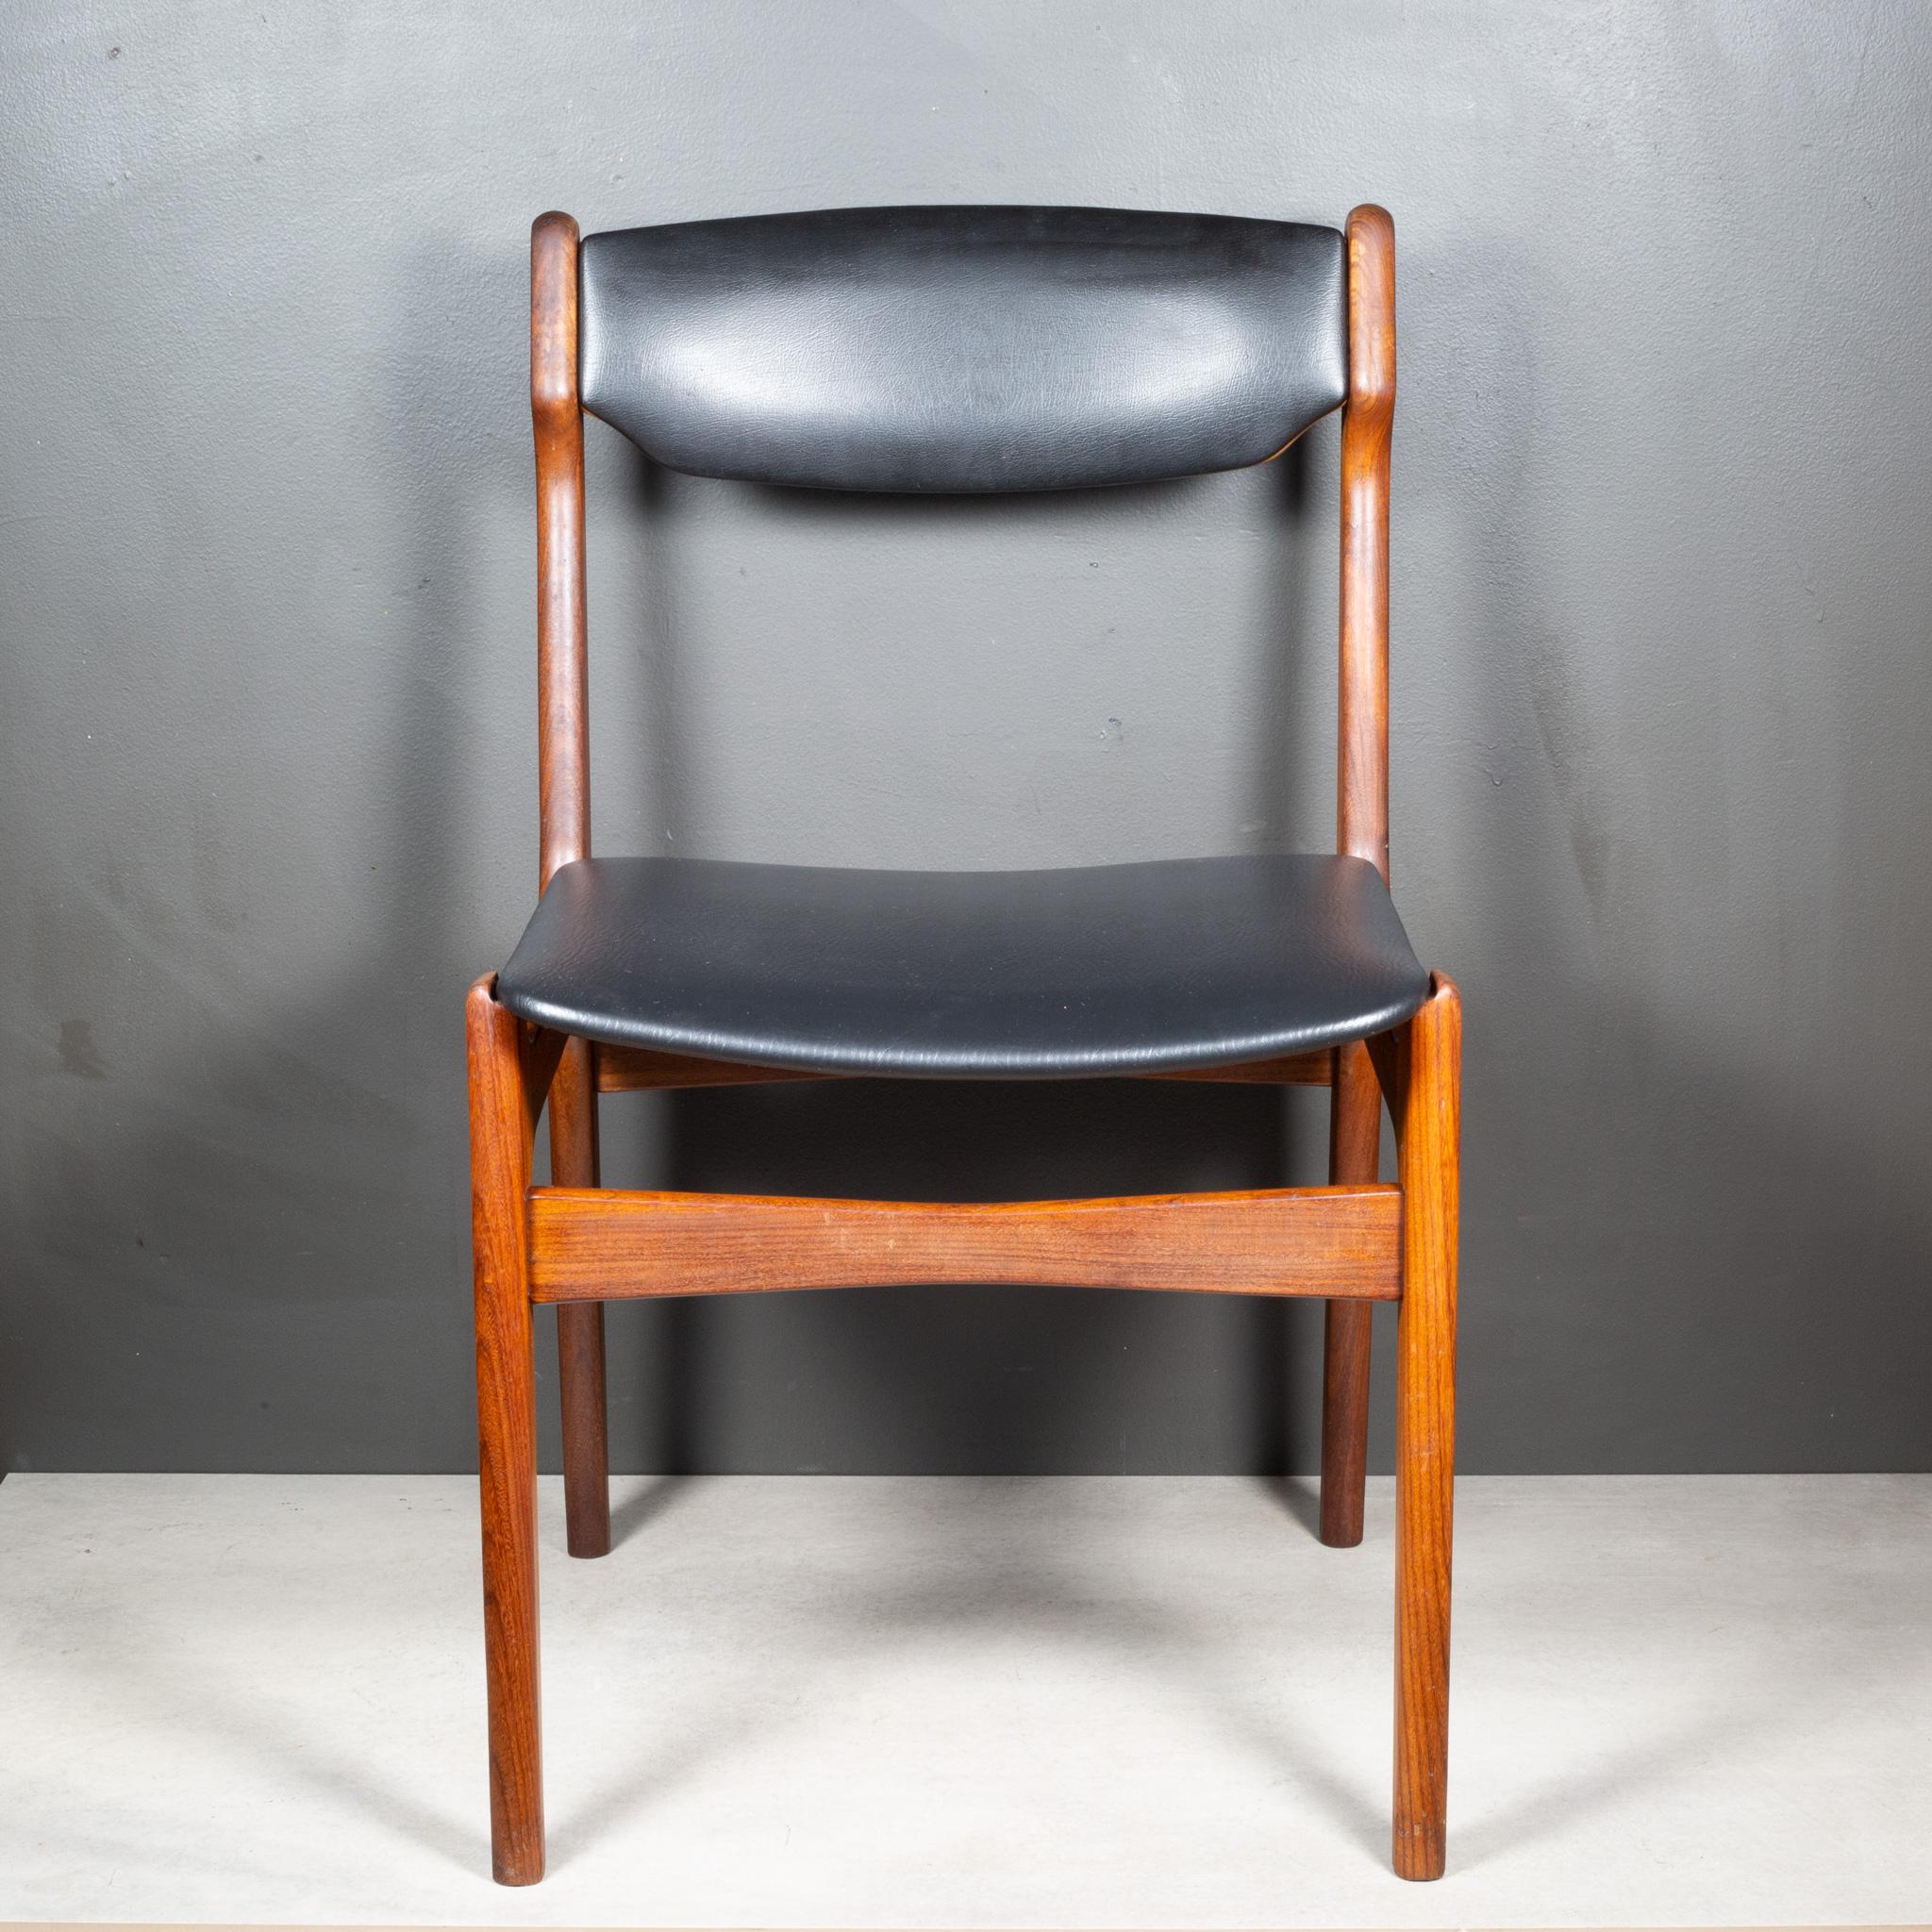  Mid-century Reupholsted Teak Dining Chairs c.1960 For Sale 4